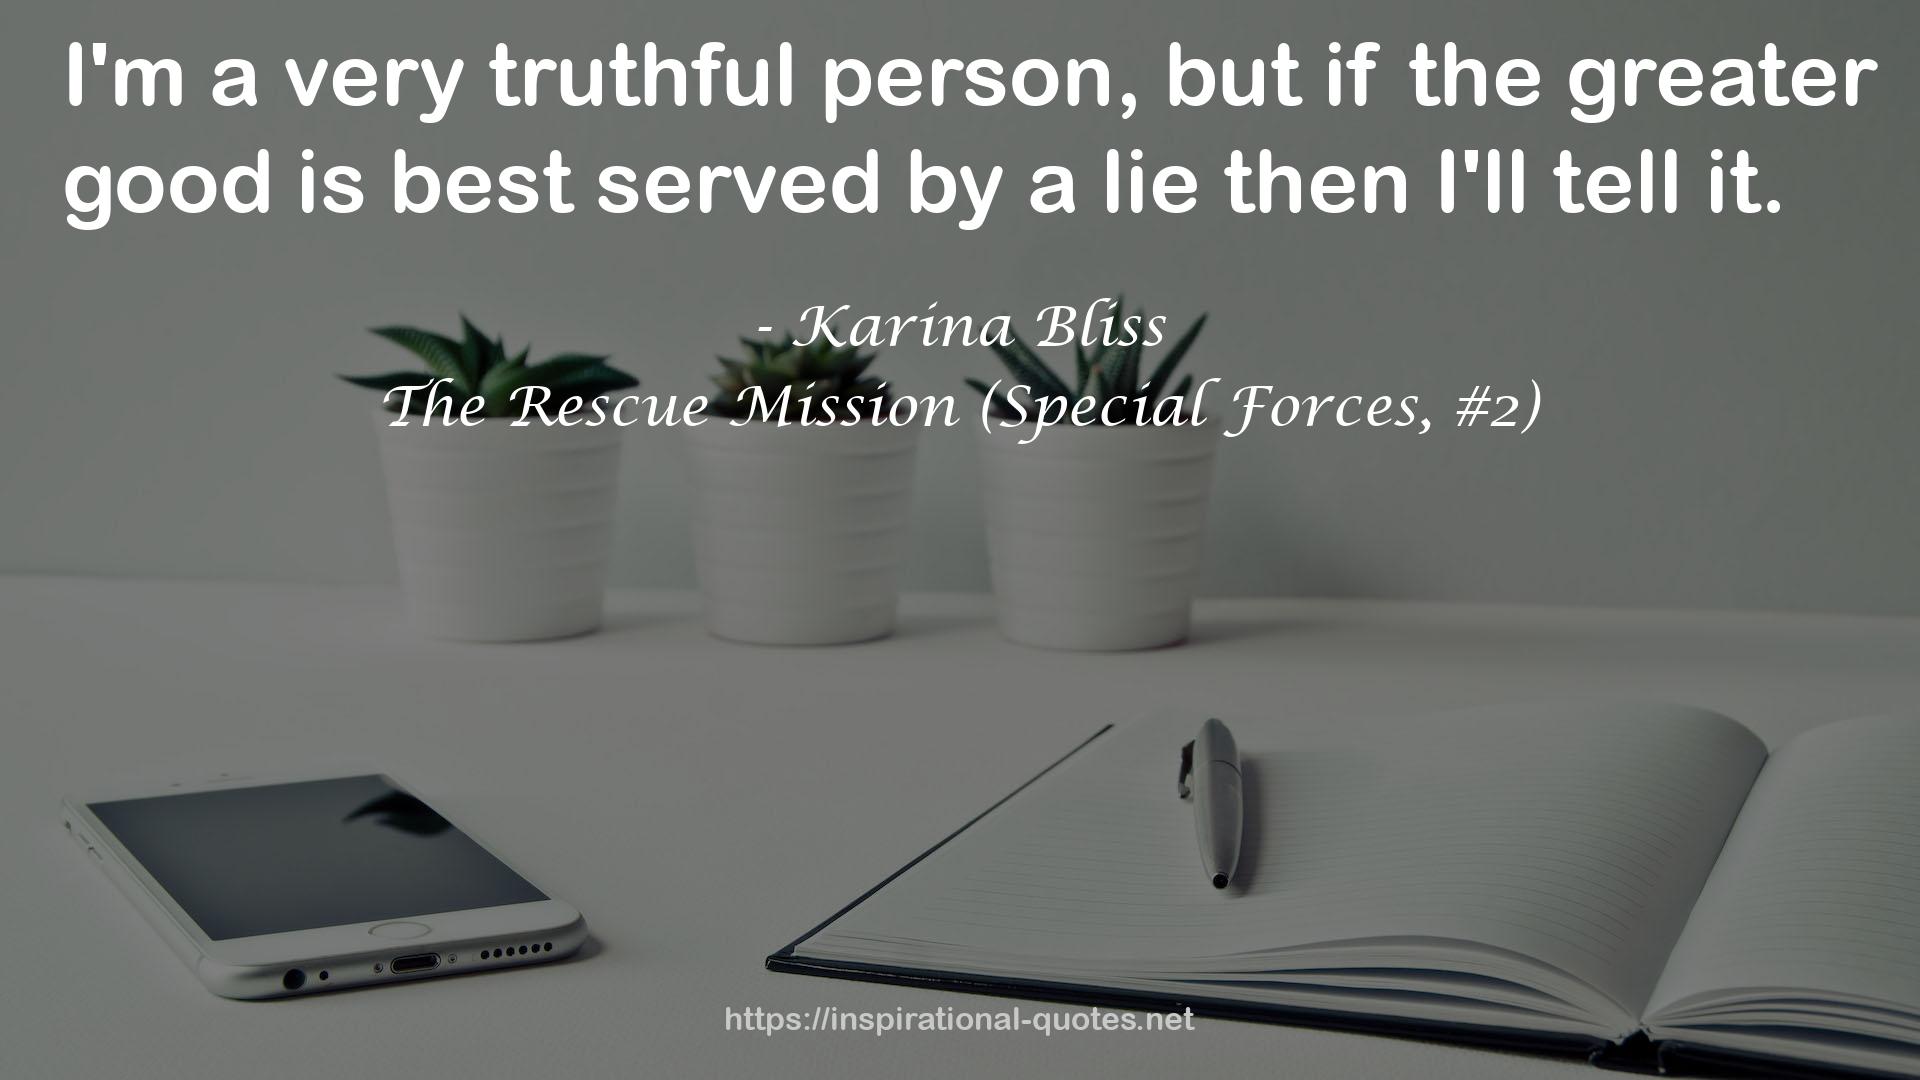 The Rescue Mission (Special Forces, #2) QUOTES